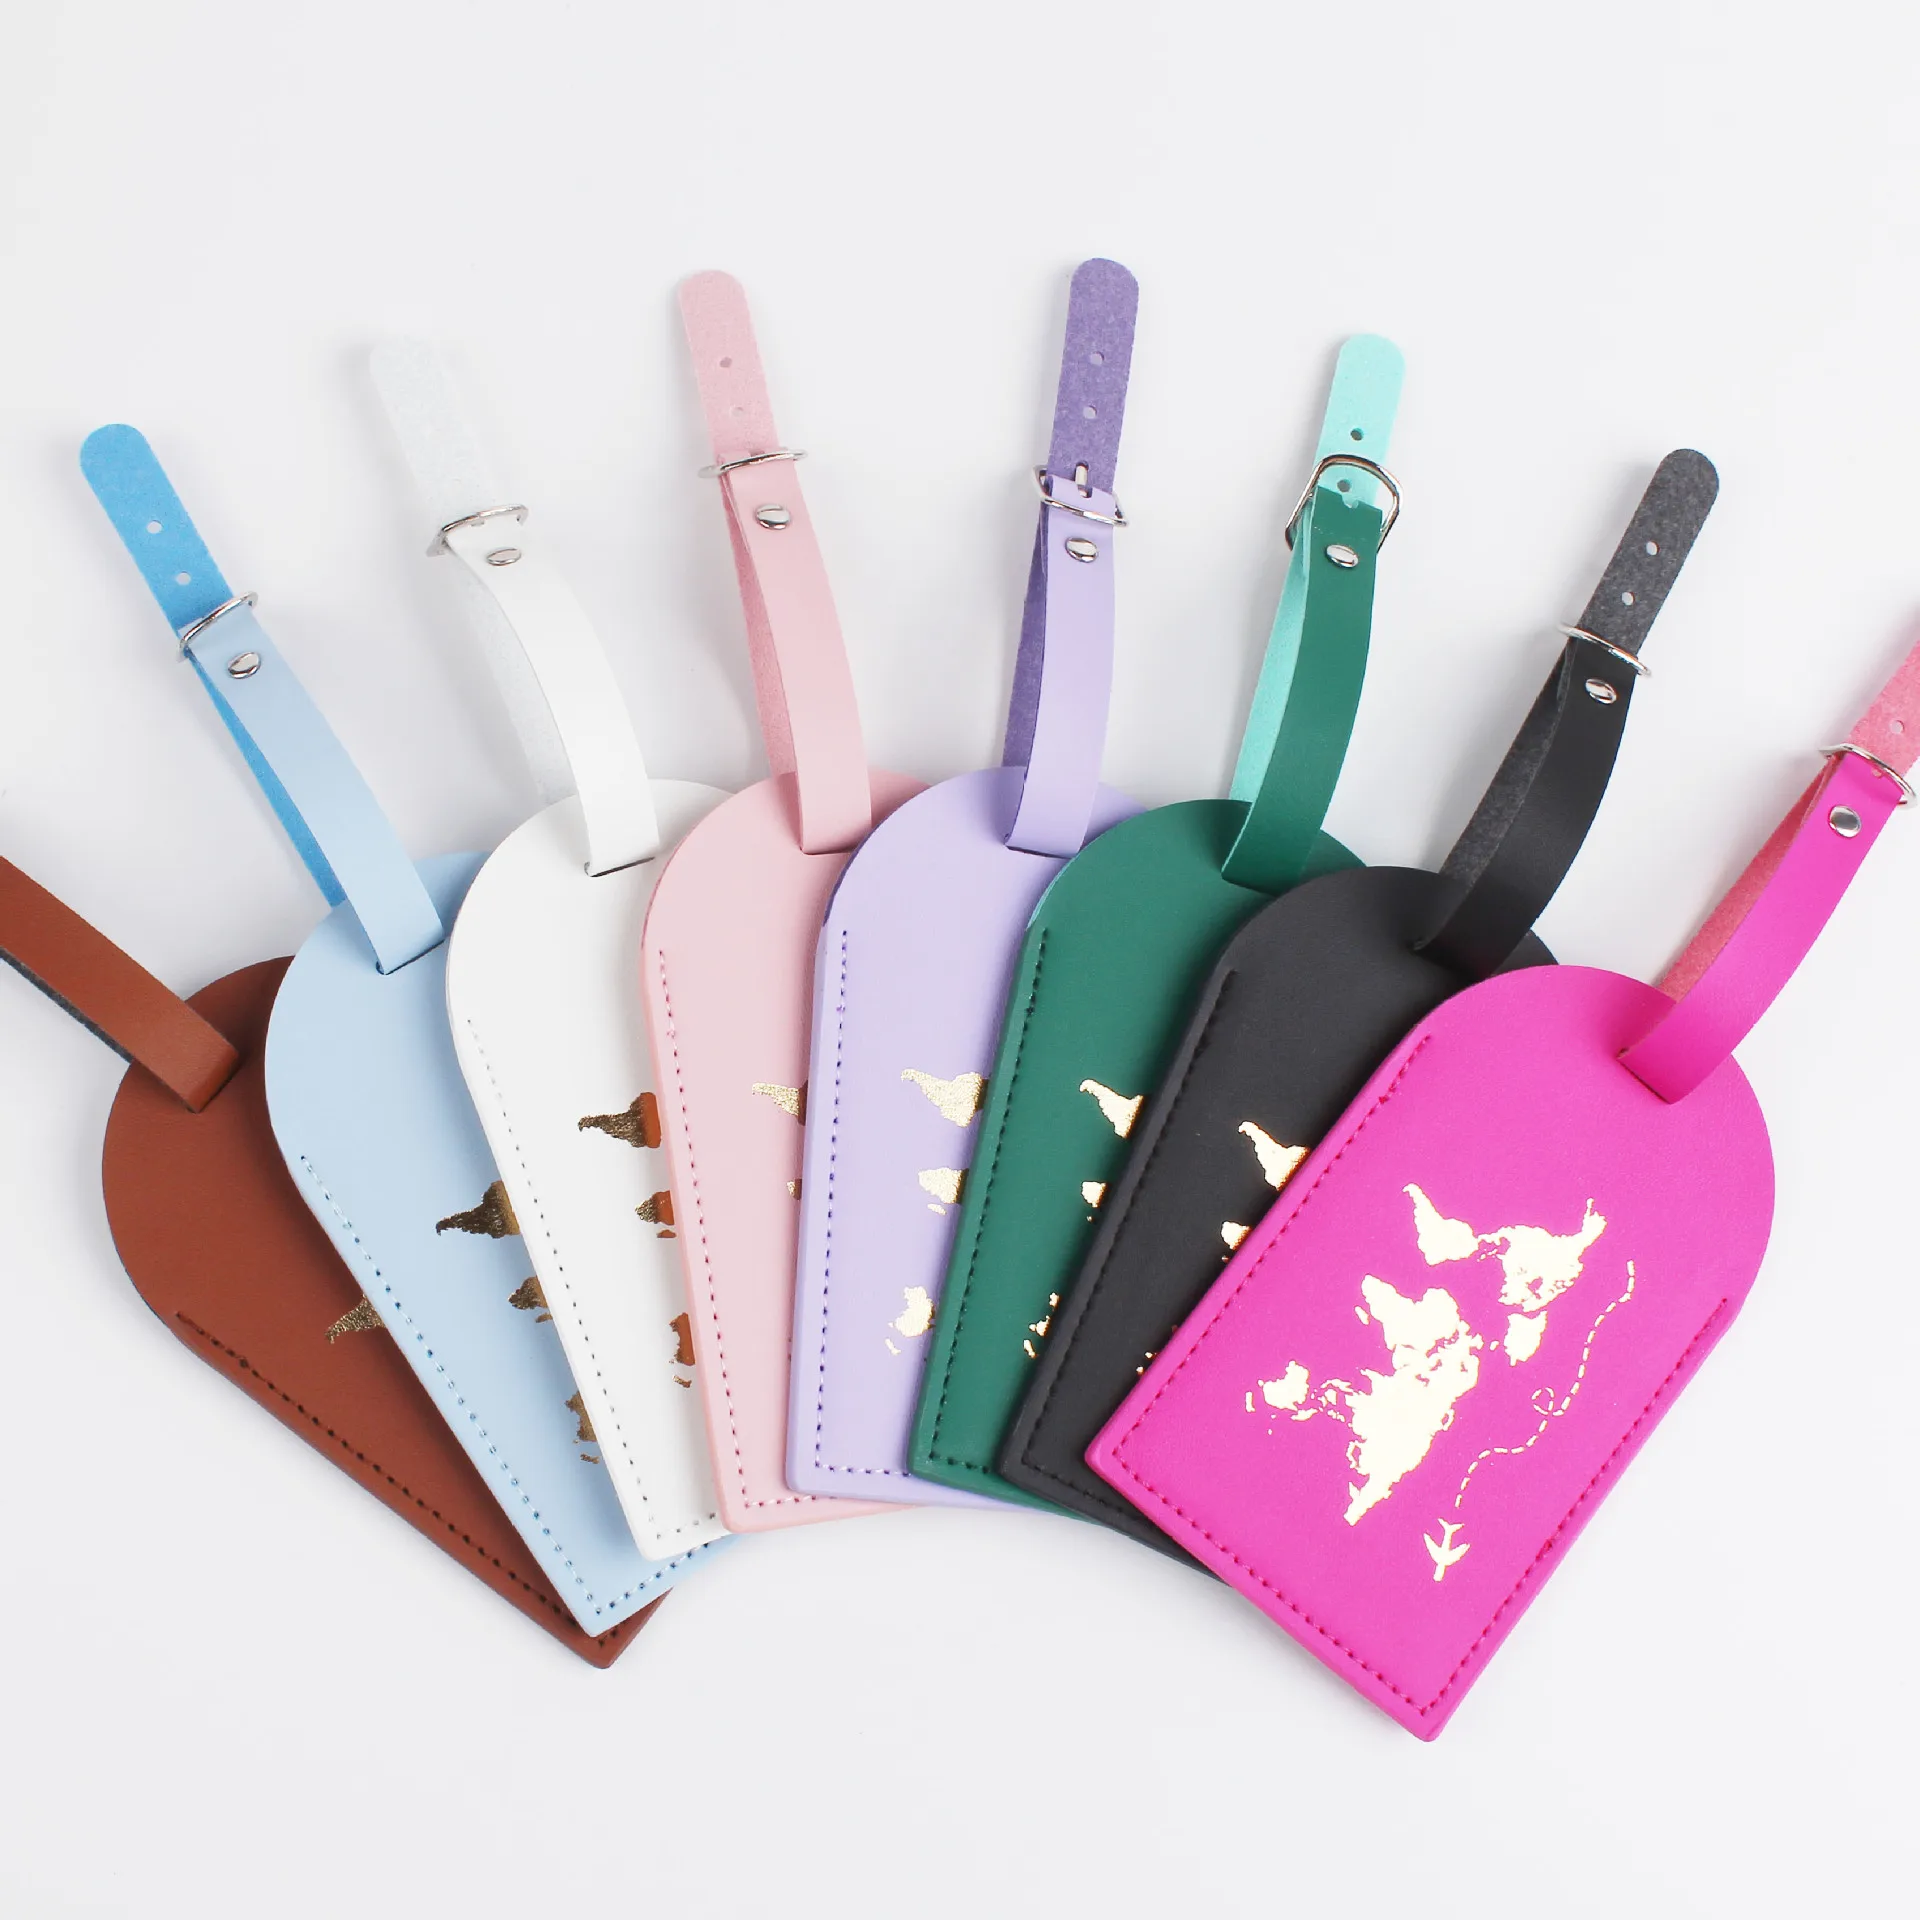 

PU Leather Luggage Tags Travel Accessories Portable ID Address Holder Identifier Suitcase Label Baggage Airplane Boarding Tag